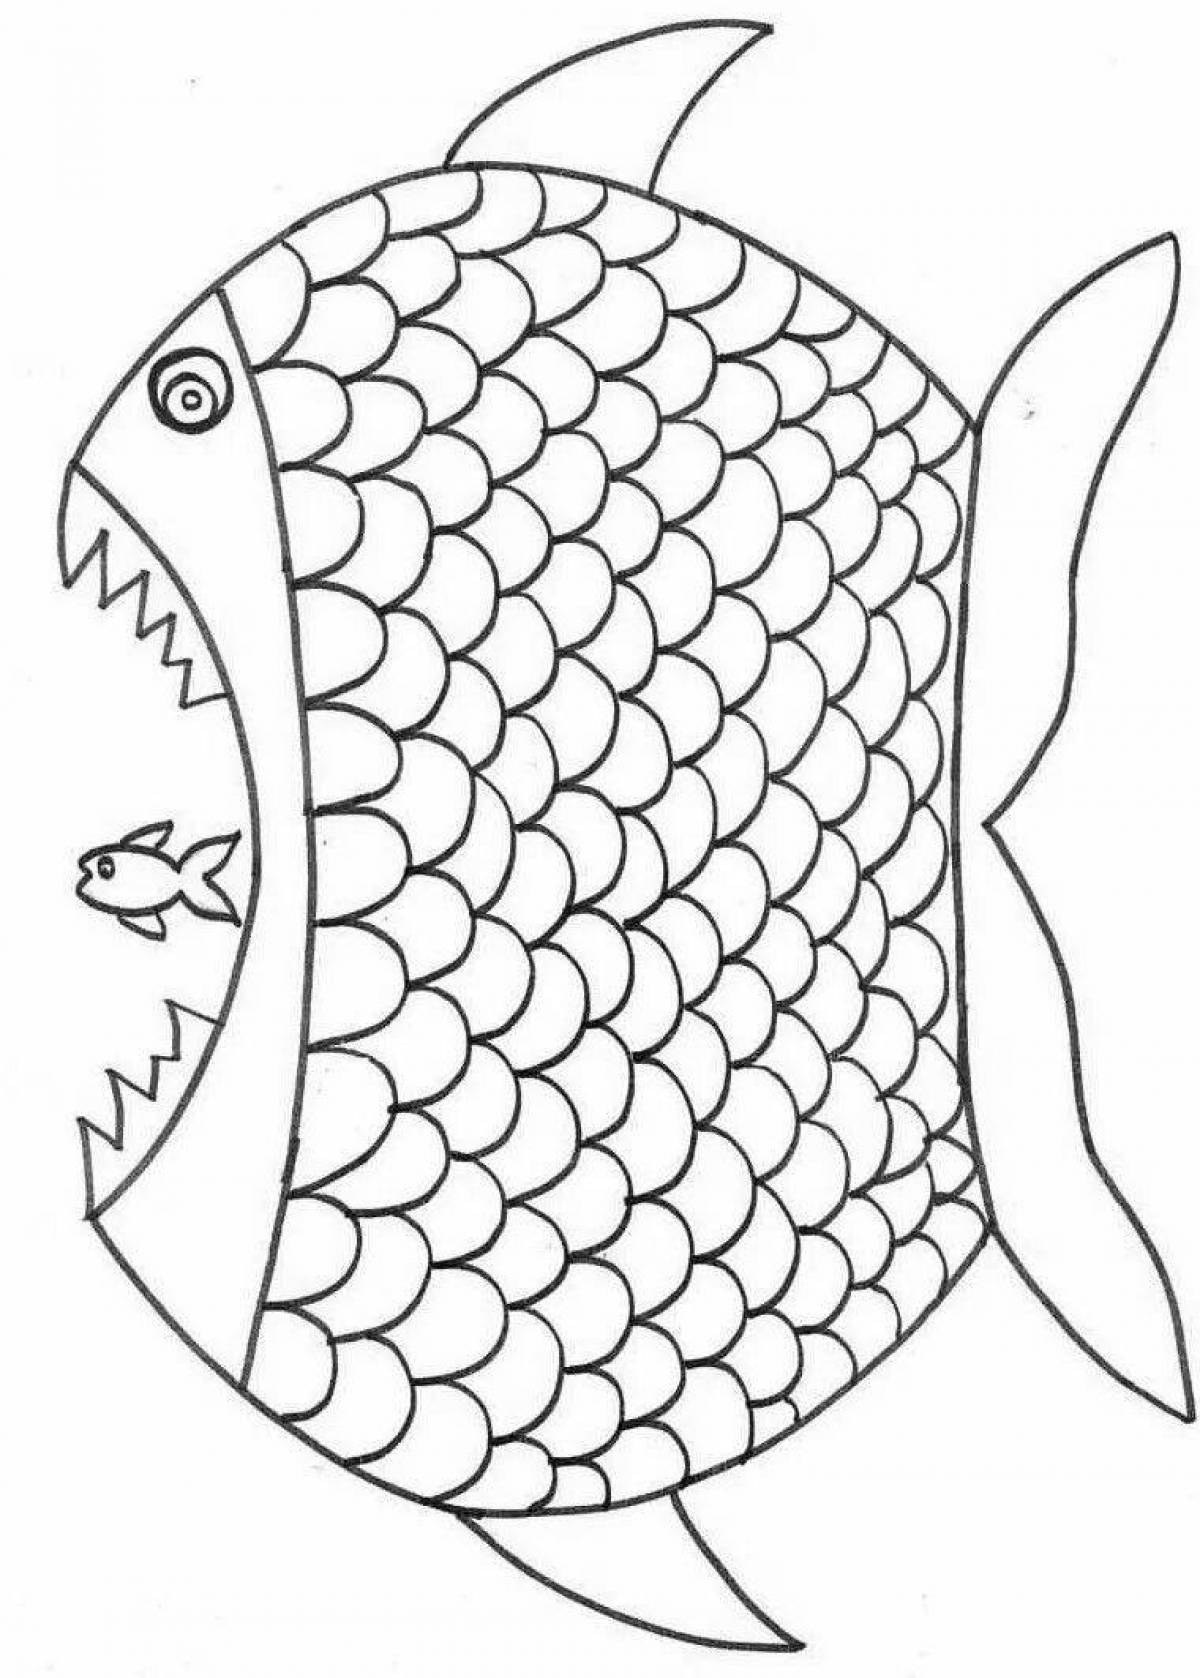 DIY coloring page with bright patterns